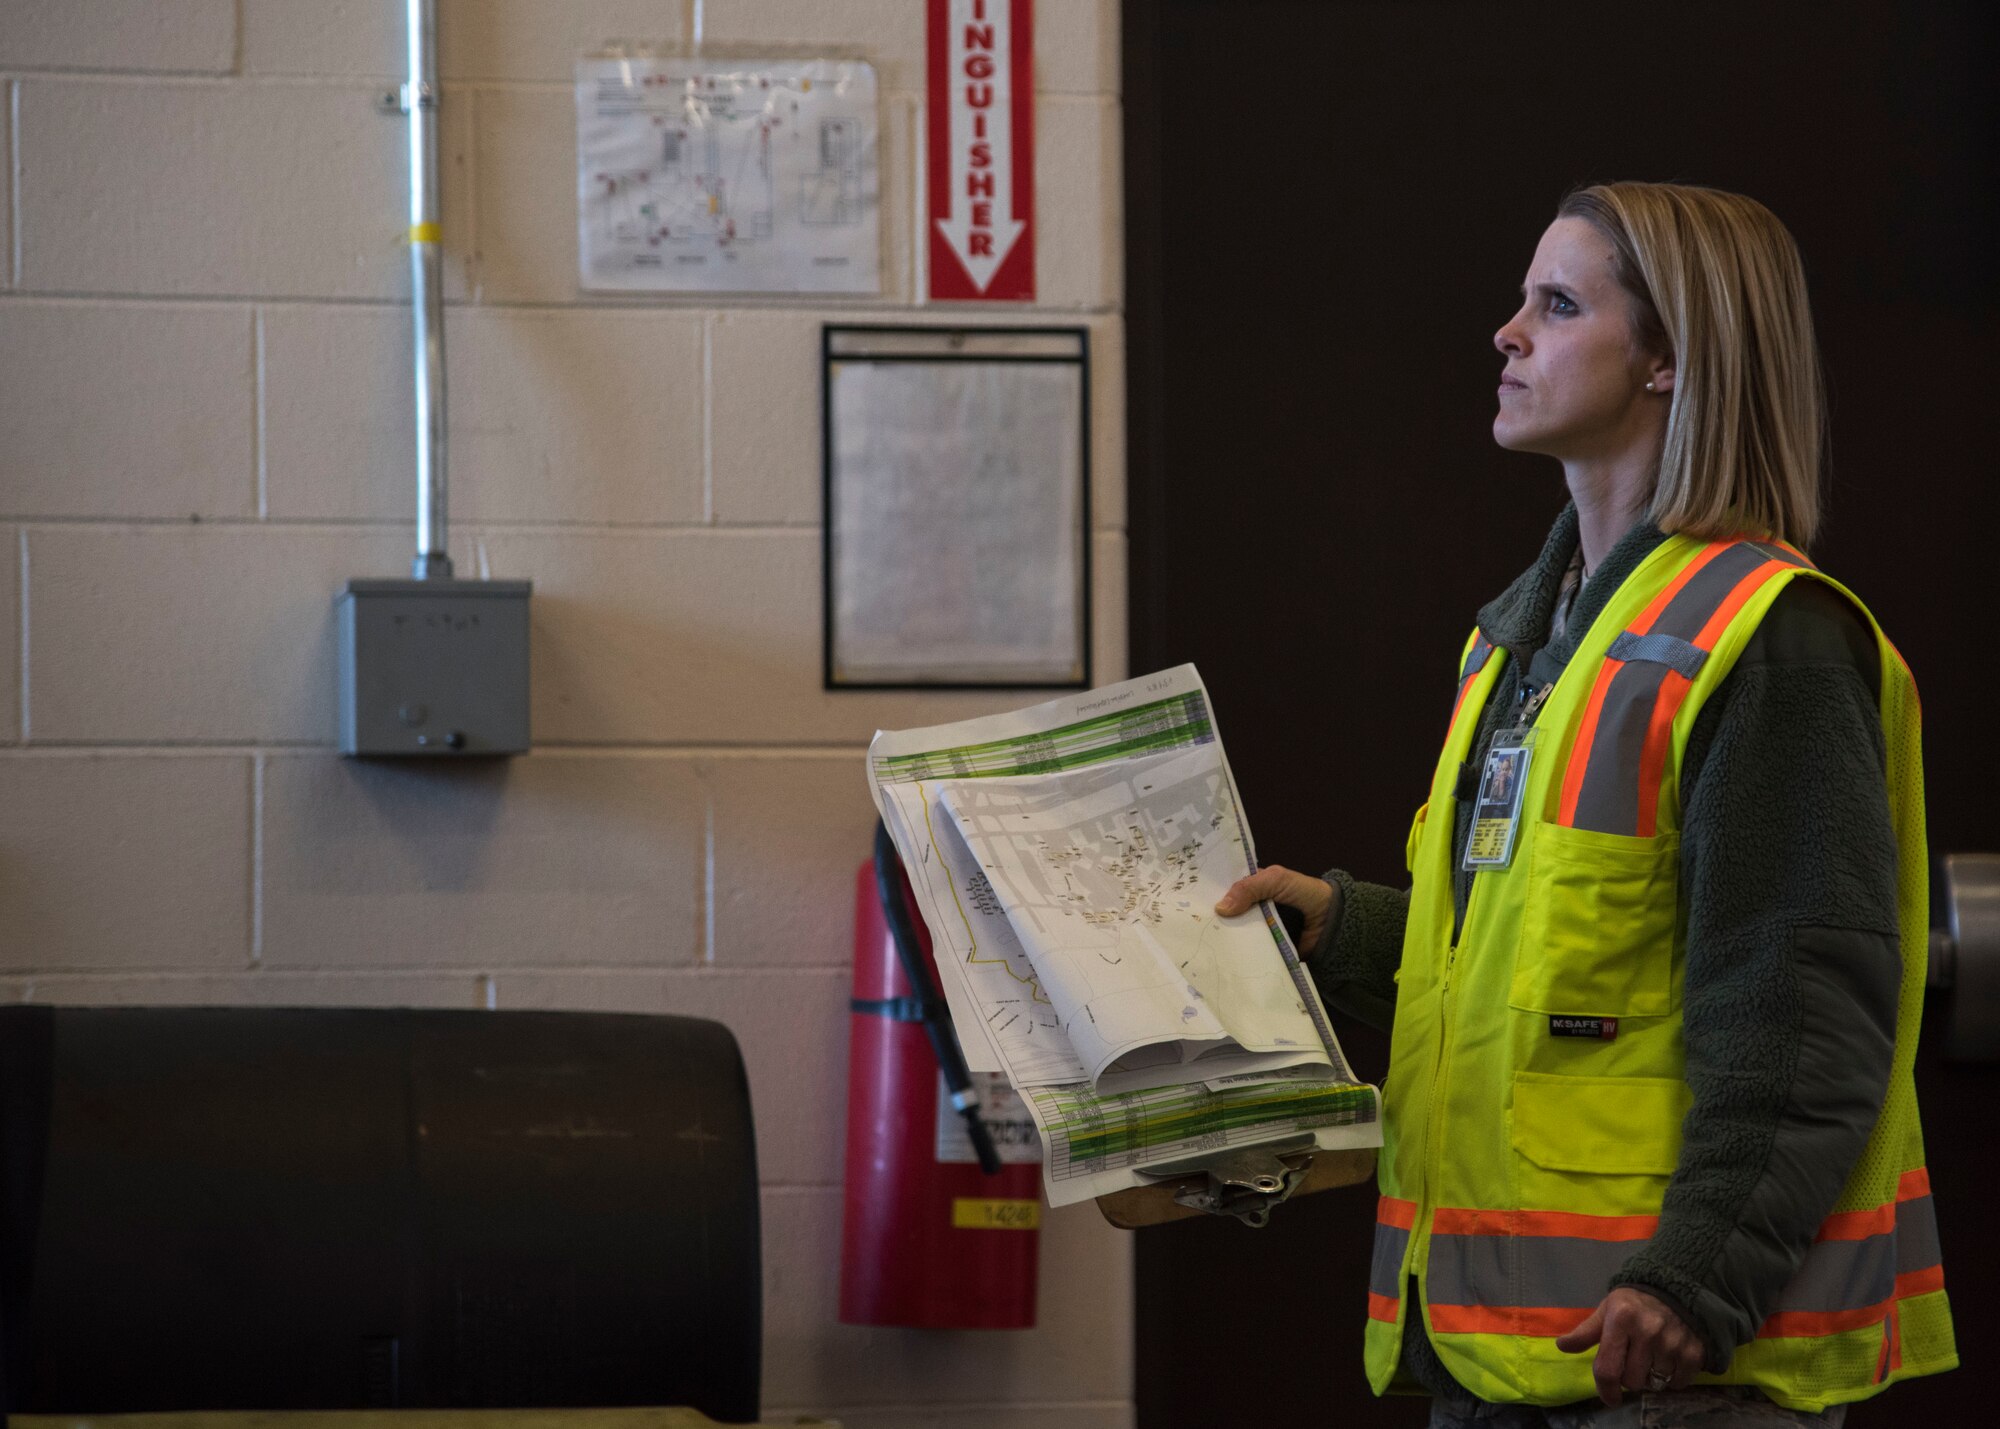 U.S. Air Force Staff Sgt. Courtney Kohnke, 673d Civil Engineer Squadron construction inspector, performs a post-earthquake inspection of a level-four rated facility at Joint Base Elmendorf-Richardson, Alaska, Jan. 31, 2019. Since the Nov. 30, 2018 earthquake more than 20 CES Airmen have been trained in the ATC-20-1 Post-earthquake Safety Evaluation of Buildings to maintain and improve agile support capabilities.